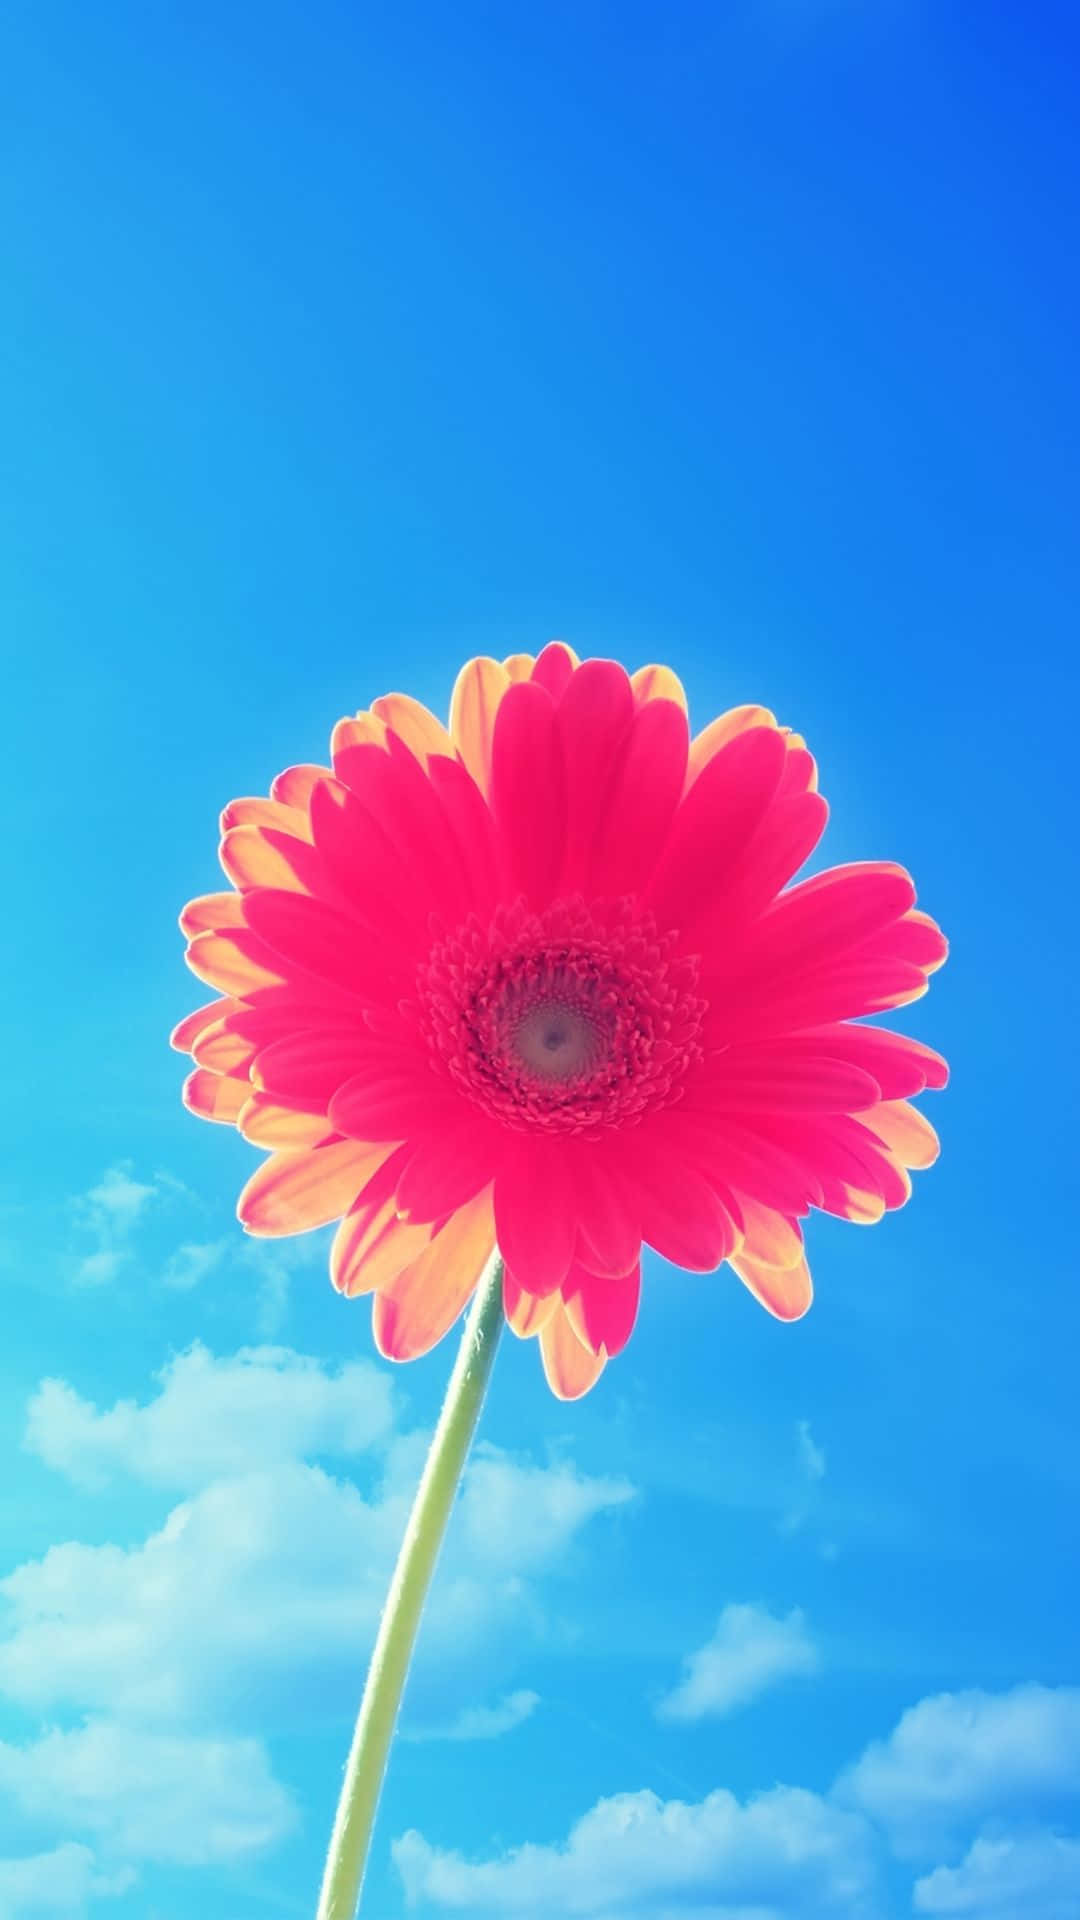 "Brighten any day with this floral iPhone wallpaper!"